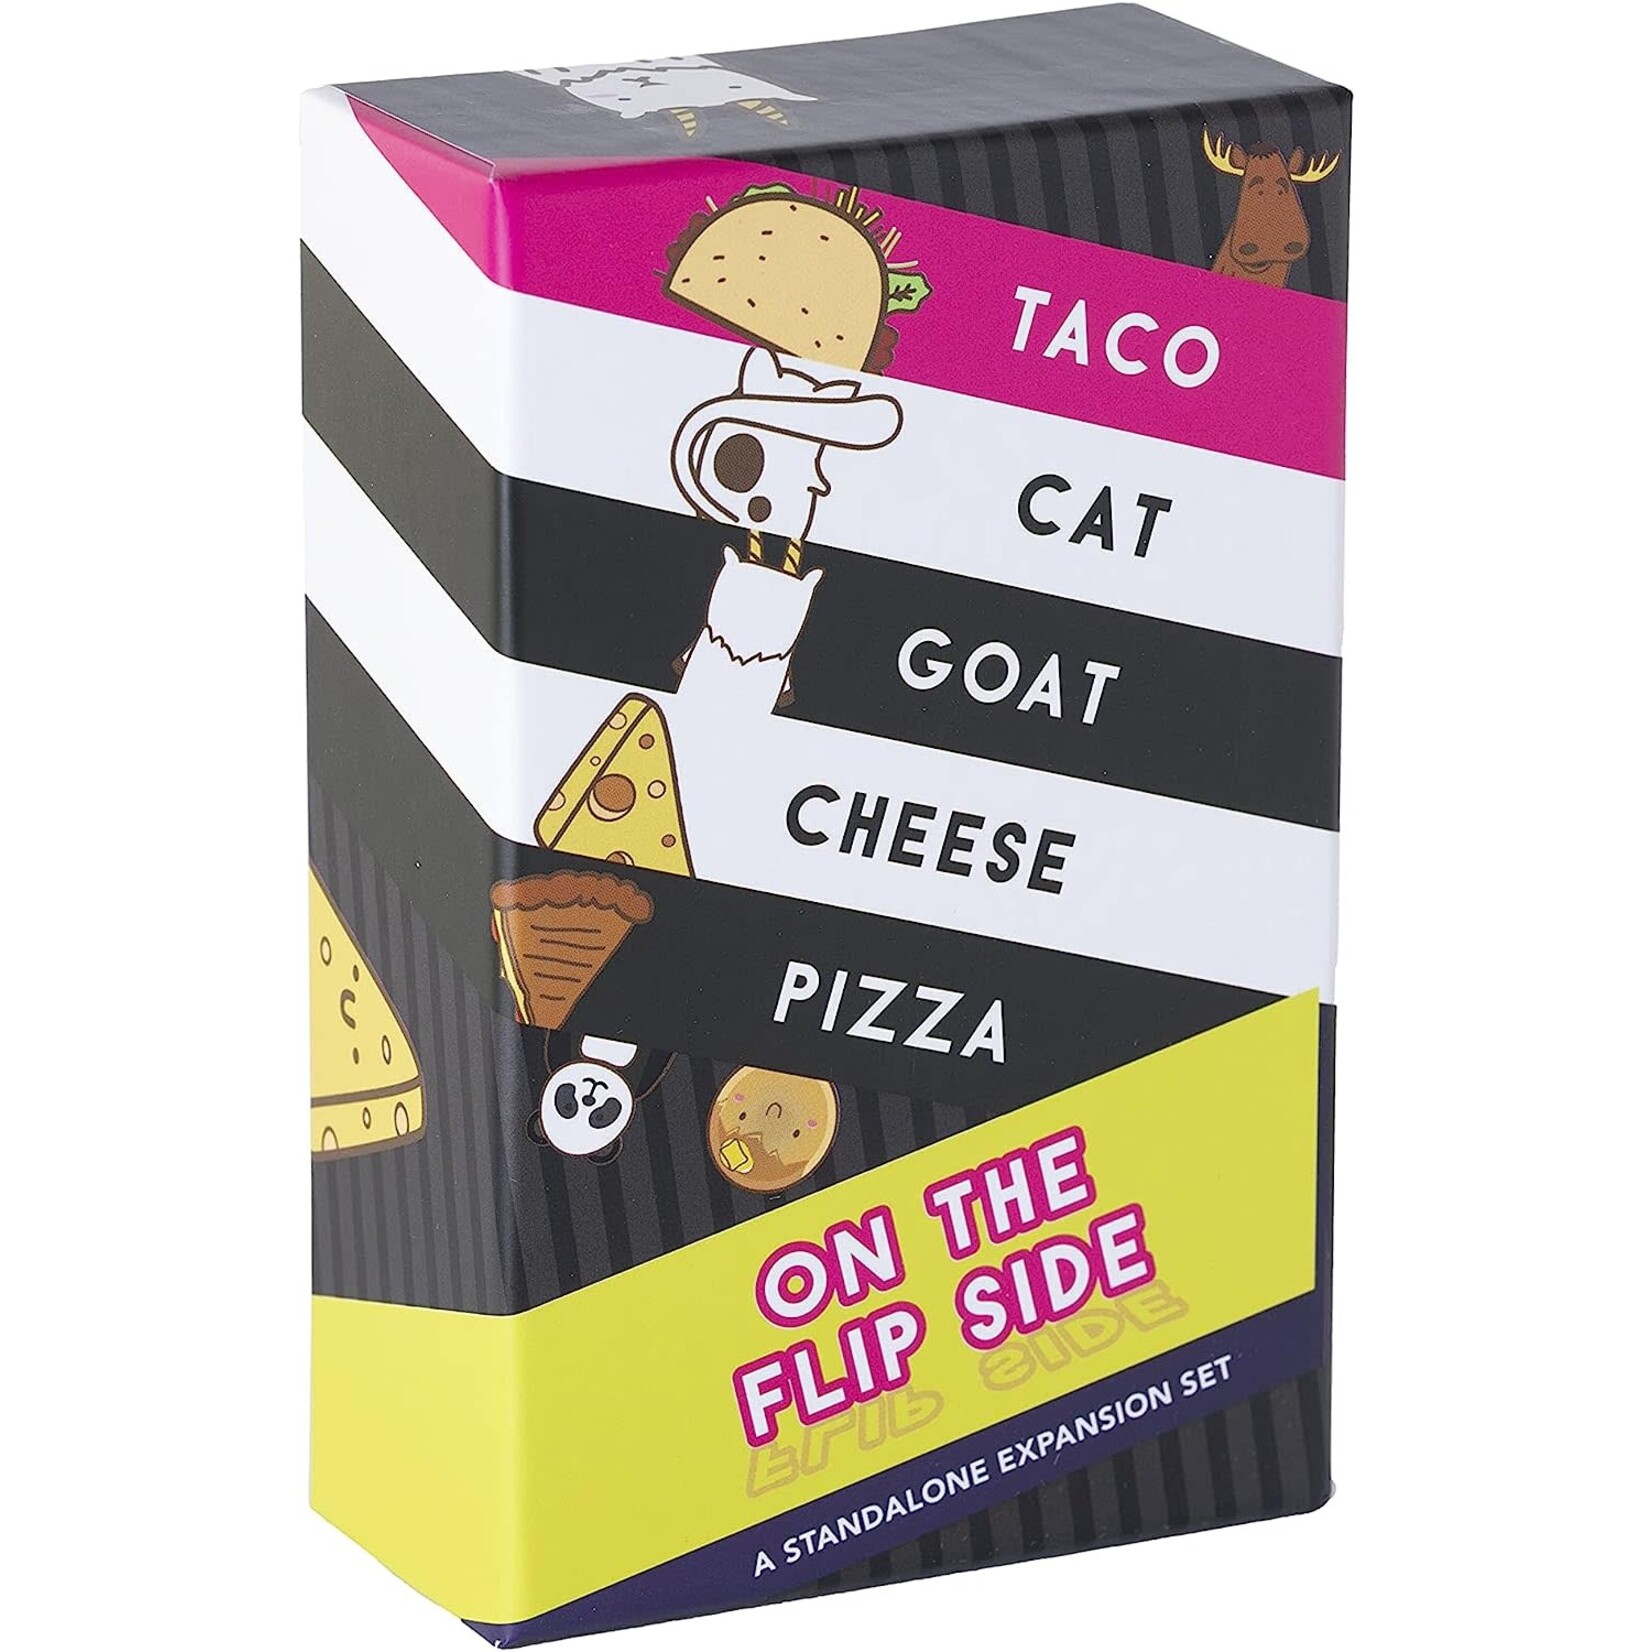 Taco Cat Goat Cheese Pizza: On The Flip Side